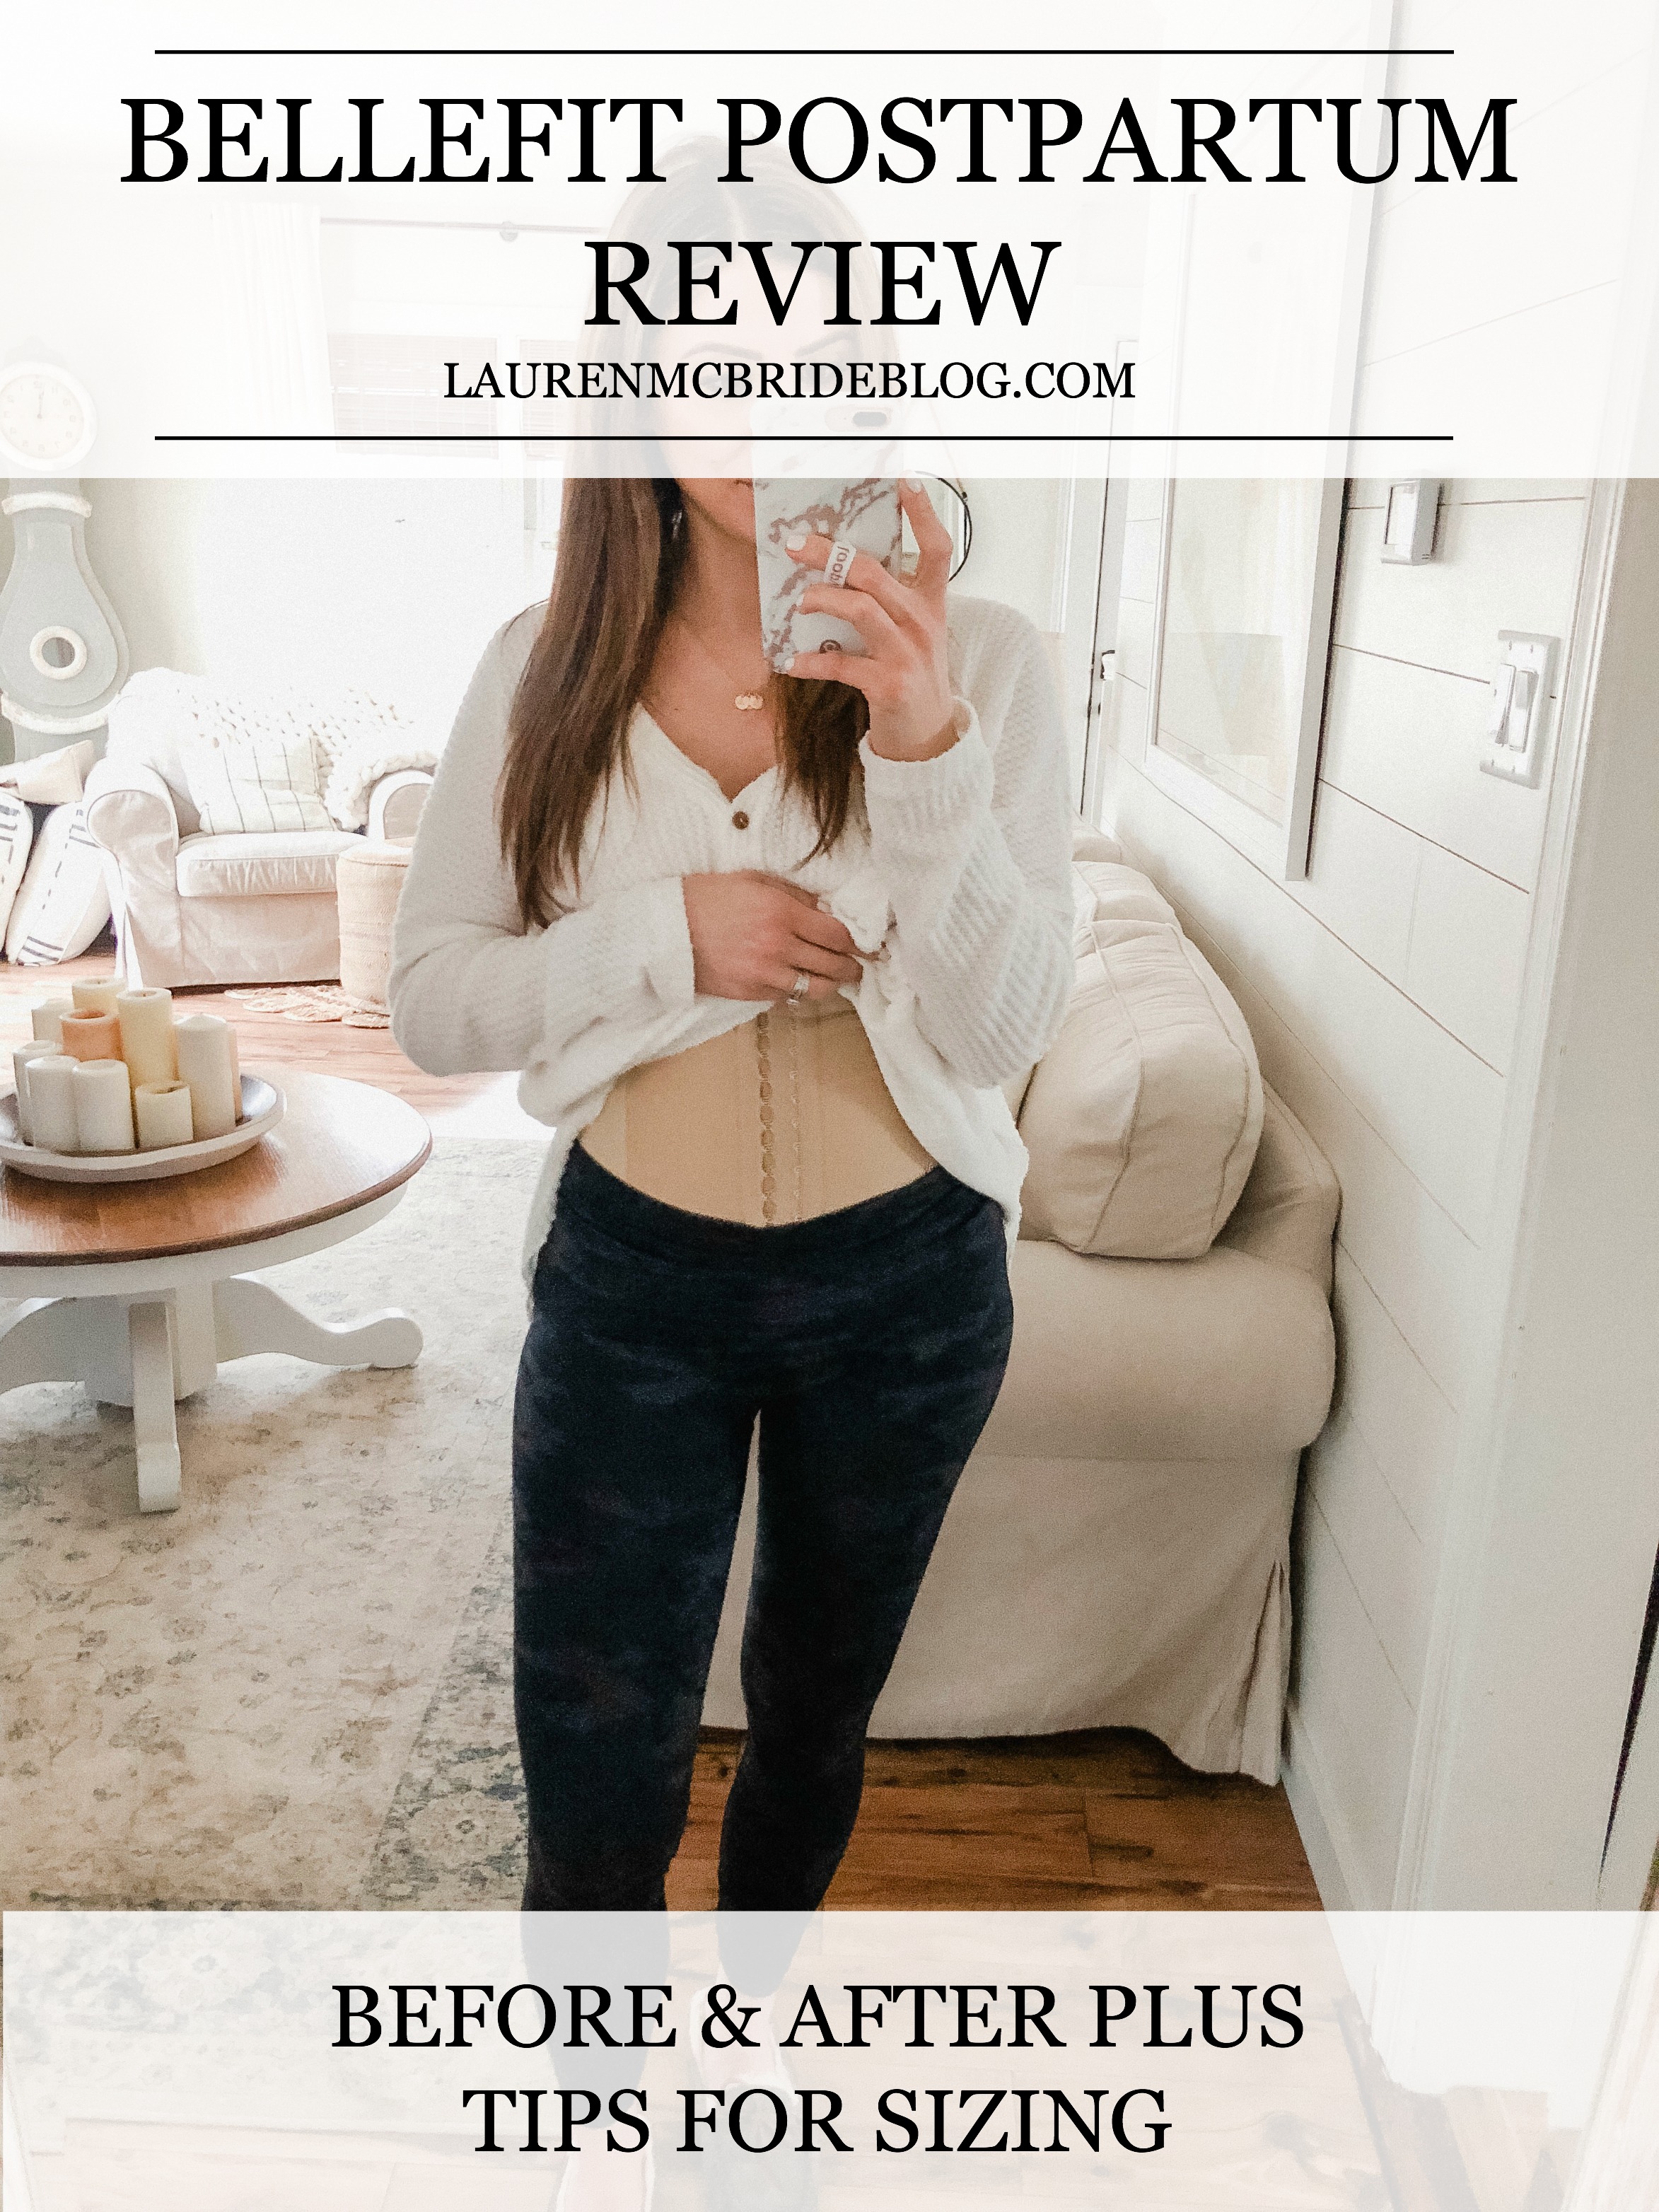 Life and style blogger Lauren McBride shares her Bellefit review as well as before and afters, plus tips for sizing and answers to FAQs.